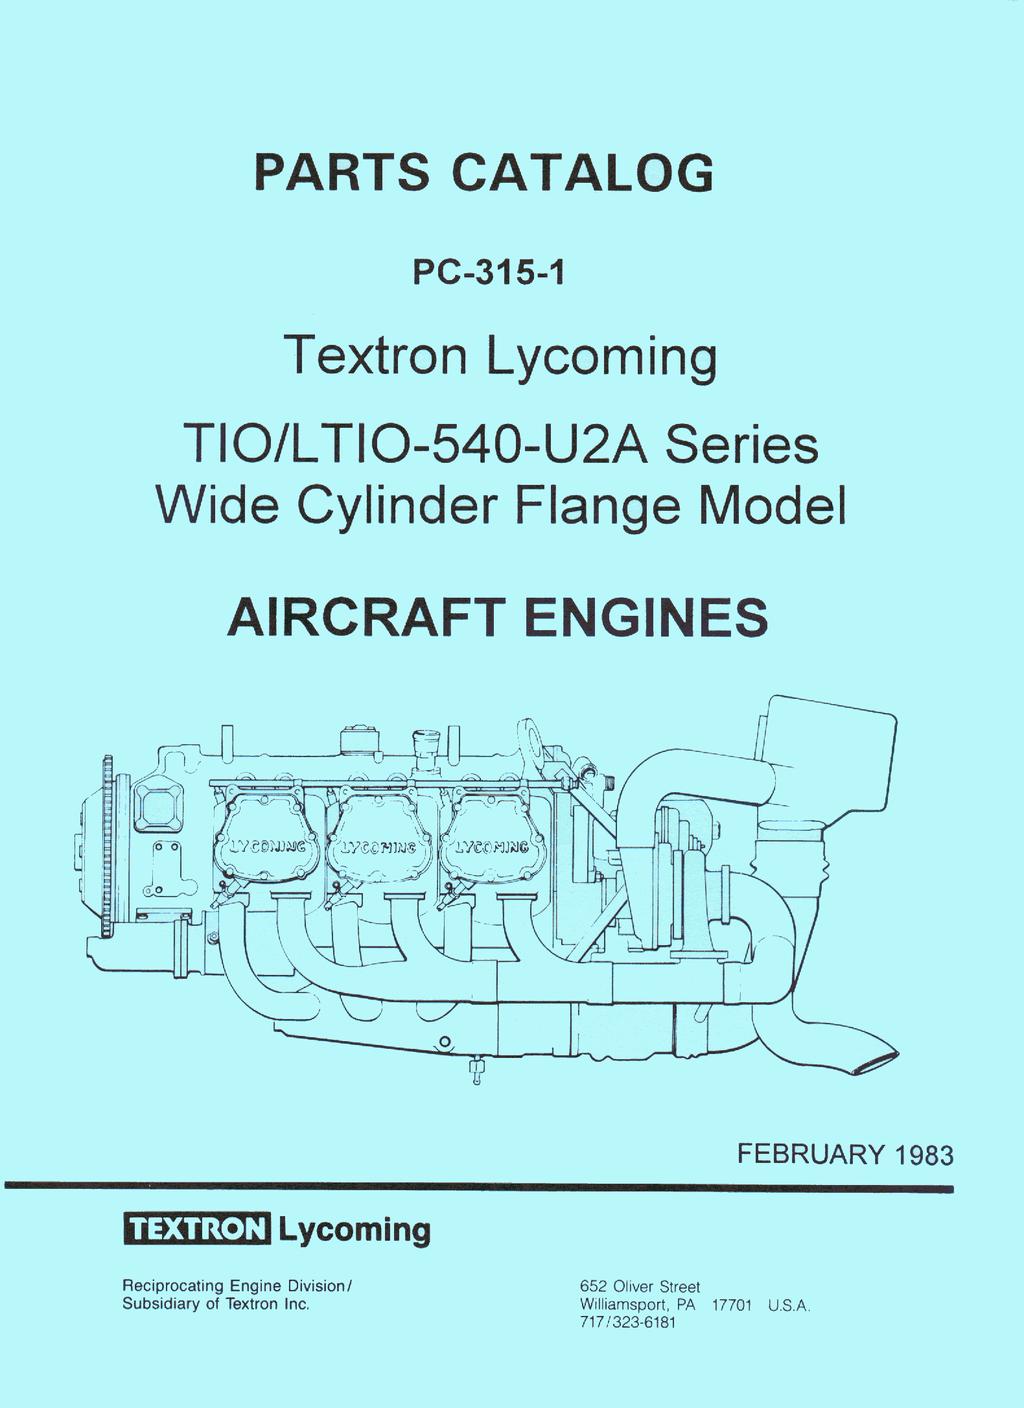 PARTS CATALOG PC-35- Textron Lycoming TIO/LTIO-540-UA Series Wide Cylinder Flange Model AIRCRAFT ENGINES Courtesy of Bomar Flying Service